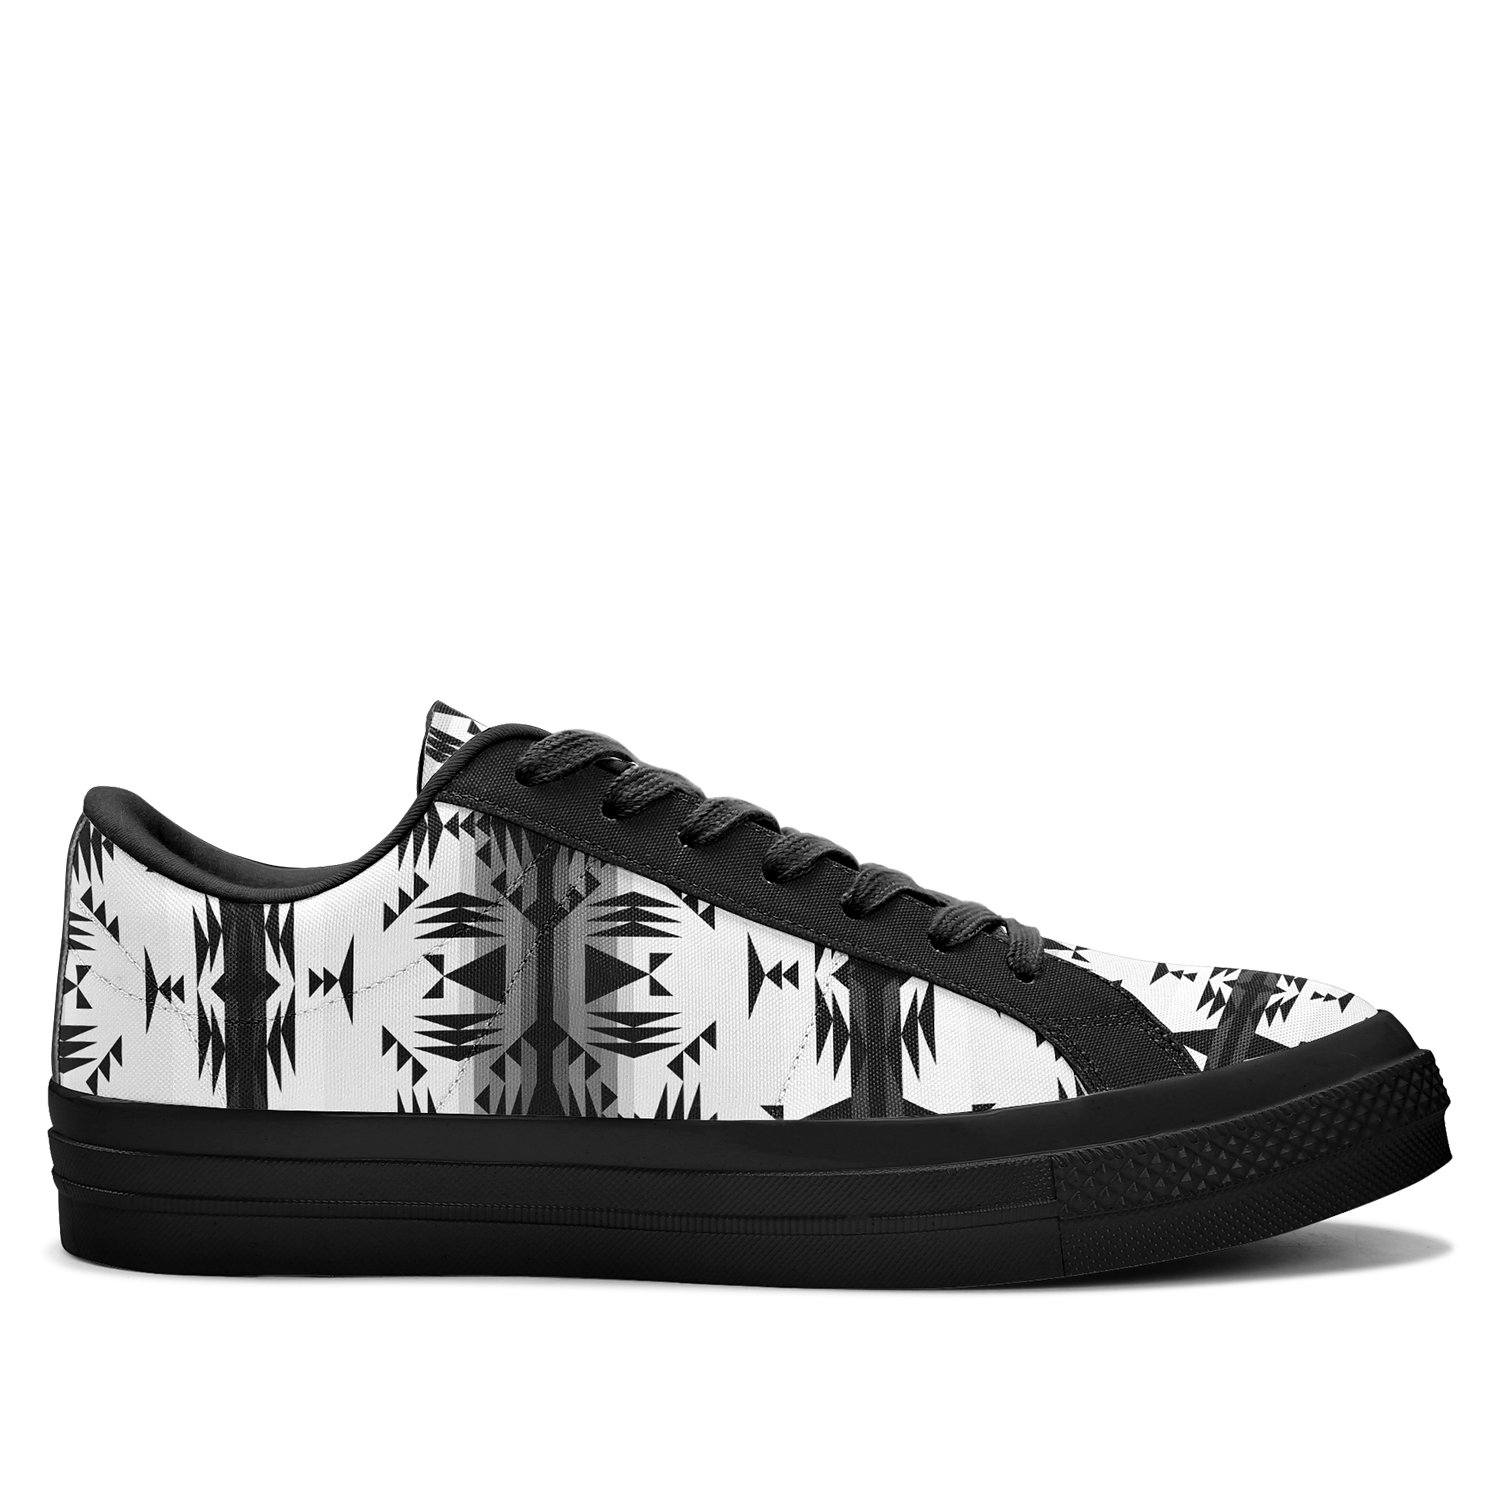 Between the Mountains White and Black Aapisi Low Top Canvas Shoes Black Sole 49 Dzine 